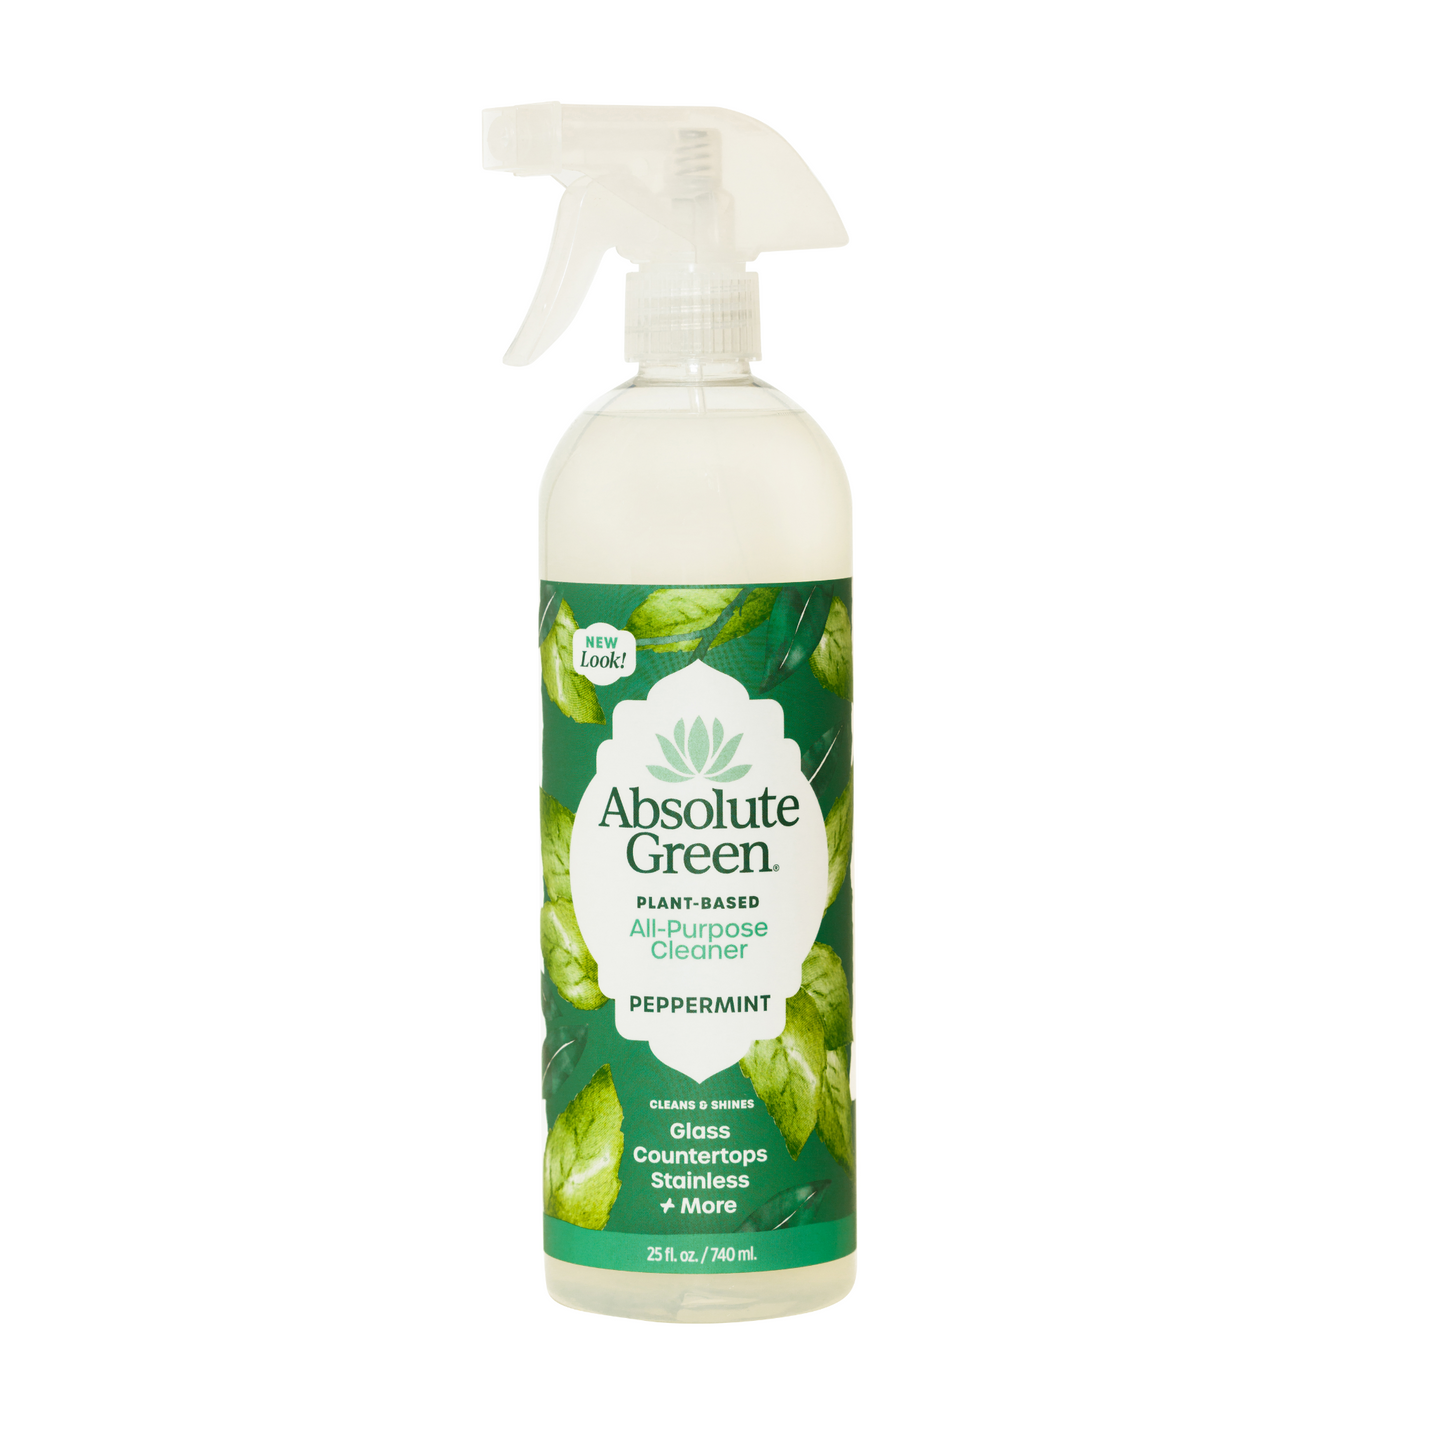 Absolute Green Peppermint All-Purpose Cleaner 100% Natural, Eco-Friendly Peppermint Cleaner is made from a blend of powerful, all natural cleaning elements with pure and natural essential oils. This effective cleaner will leave your home energized and minty fresh!  